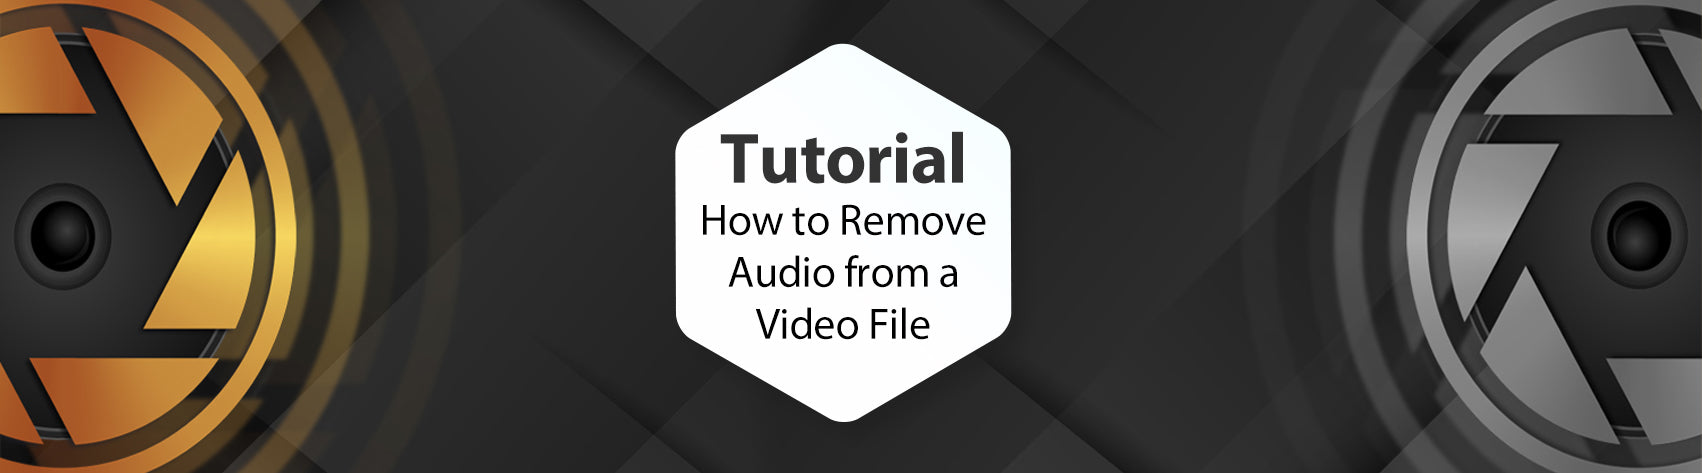 Removing Audio from a Video File